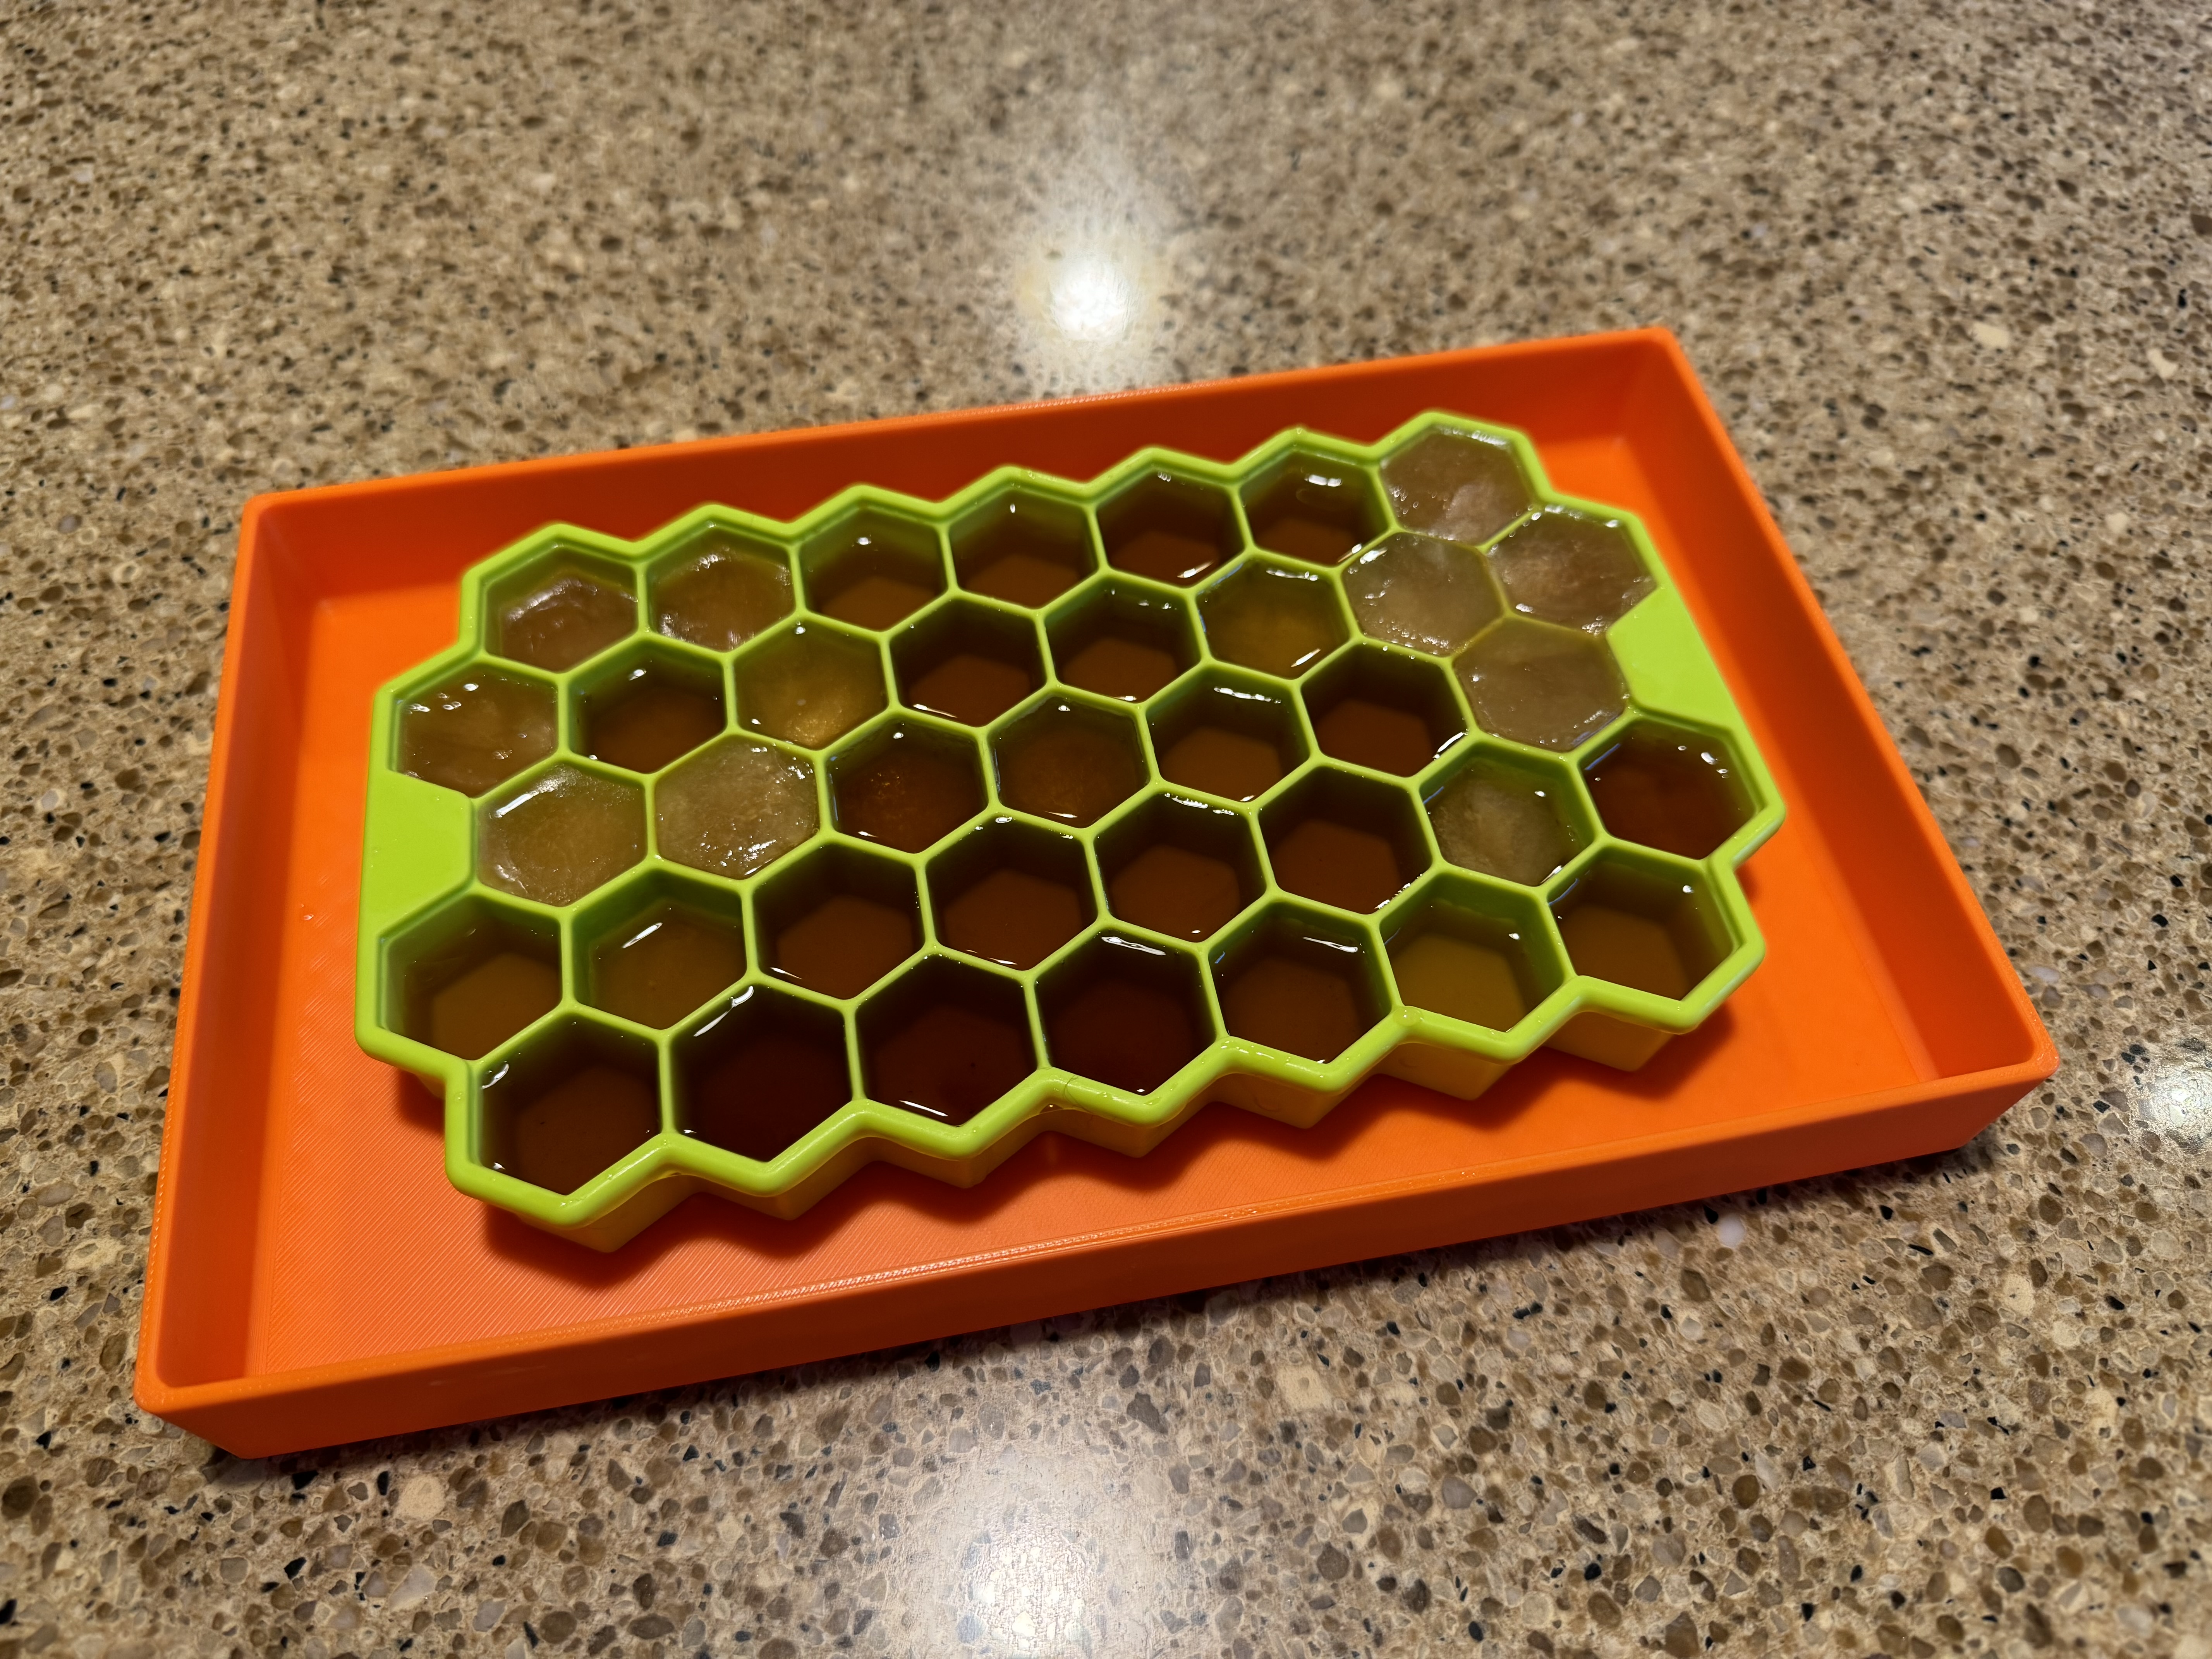 an orange tray with a lime green silicone ice tray that is subdivided into hexagons. within the hexagons is liquid black tea.